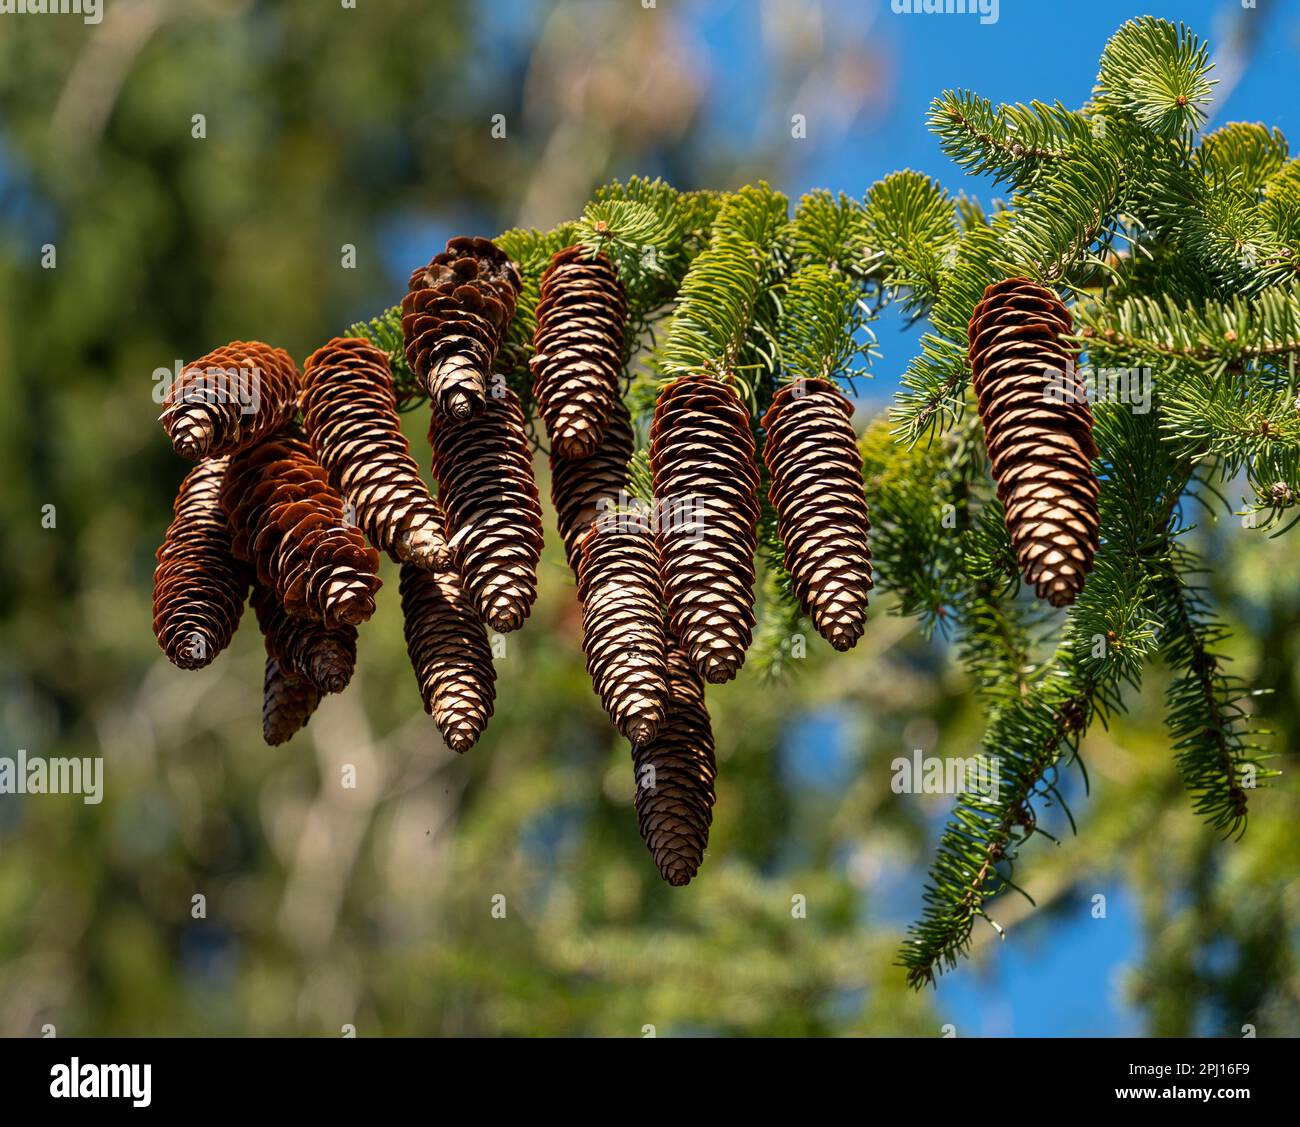 Low angle shot showing some spruce cones on a twig in sunny ambiance Stock Photo